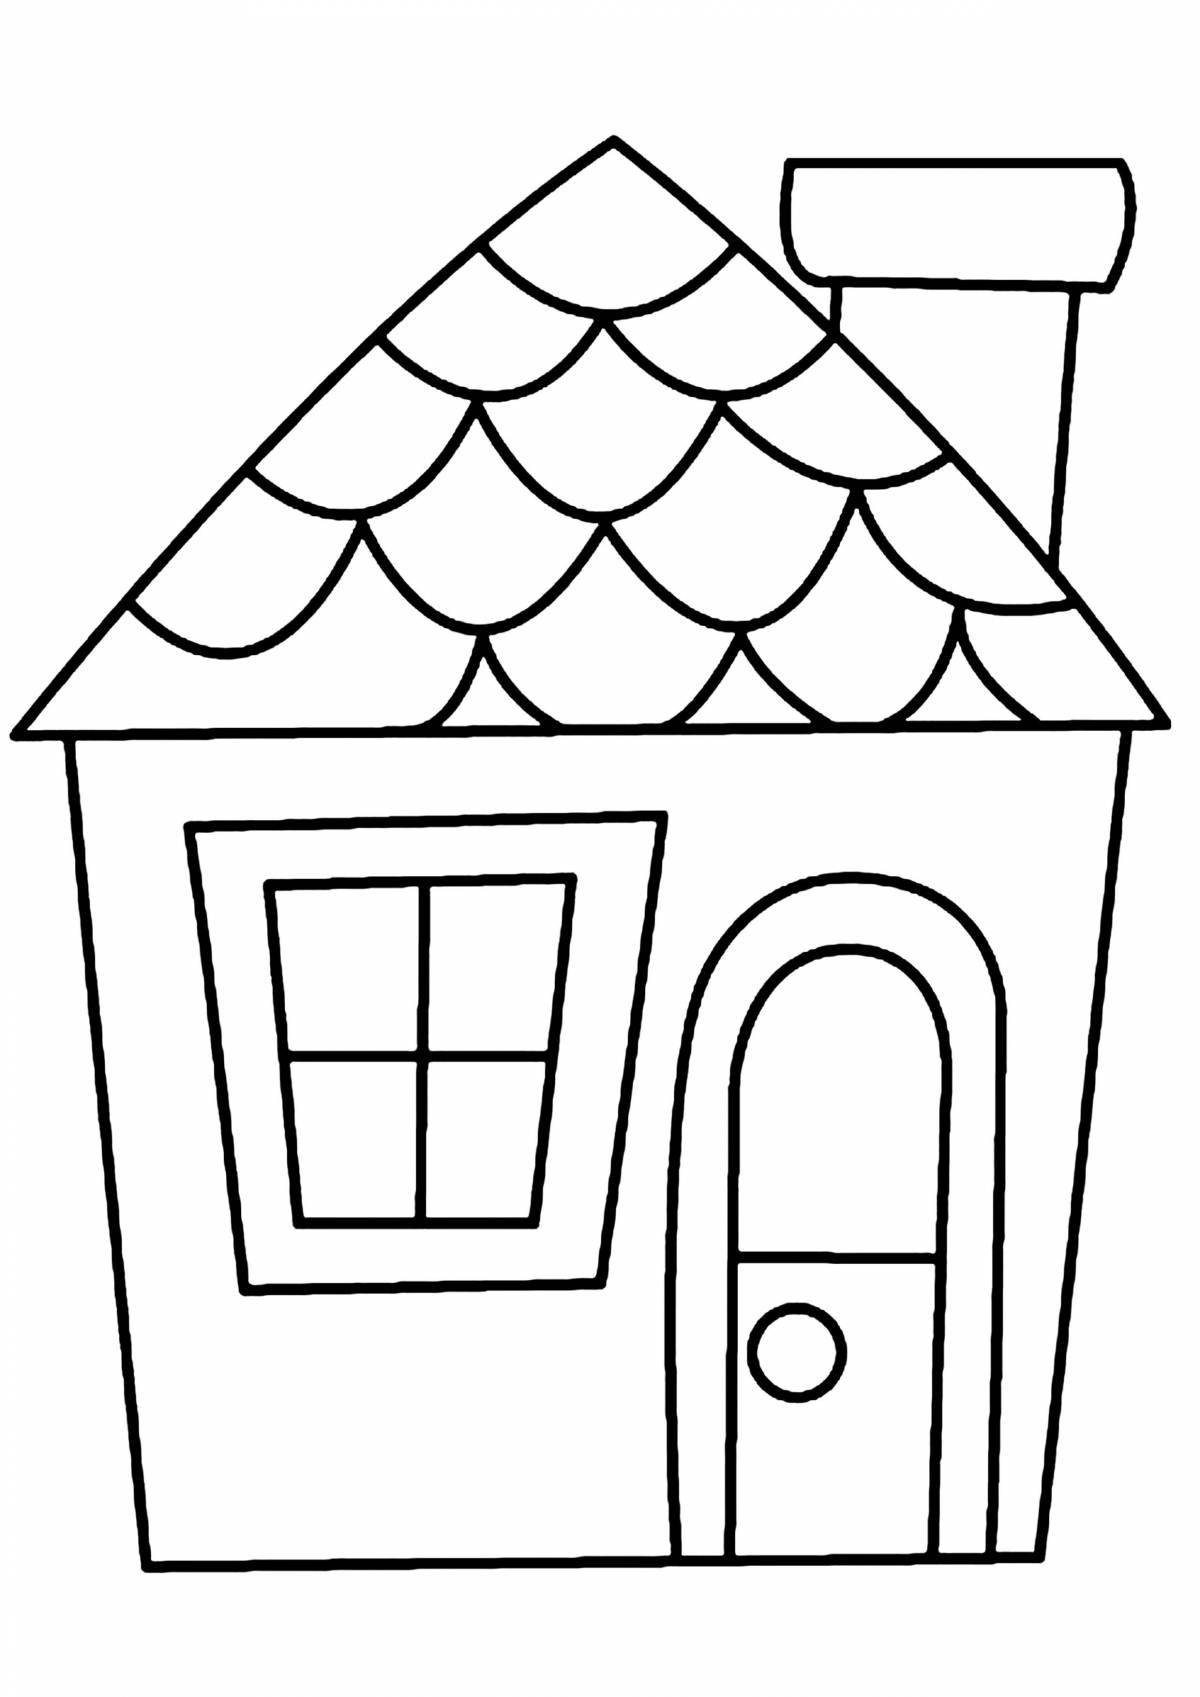 Coloring book shining simple house